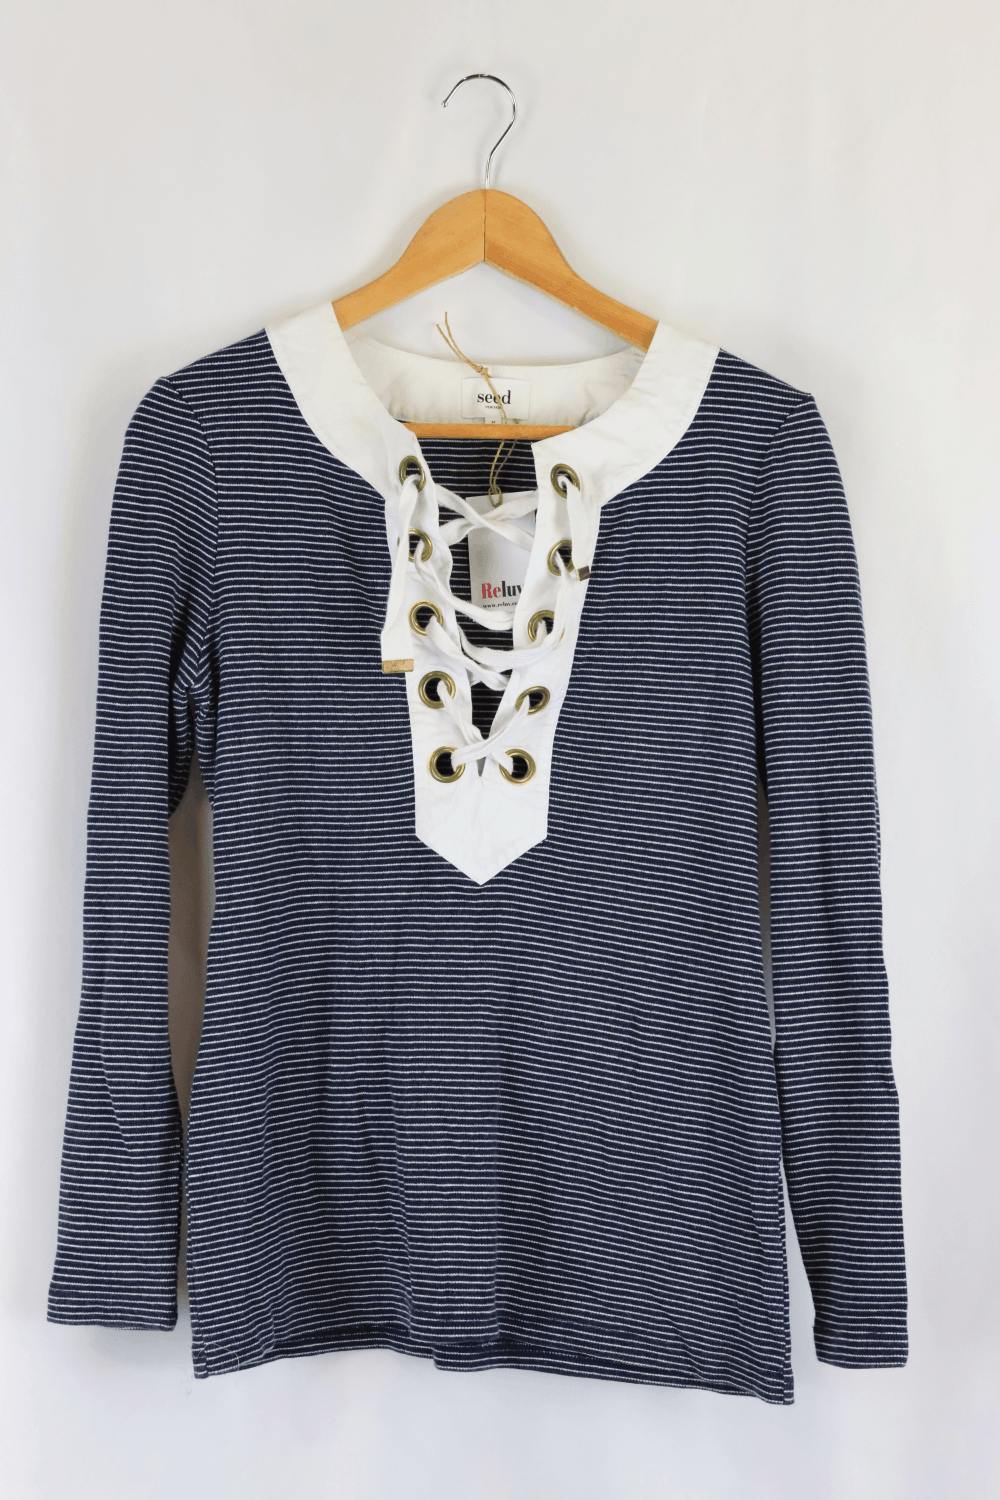 Seed Heritage Navy And White Top M